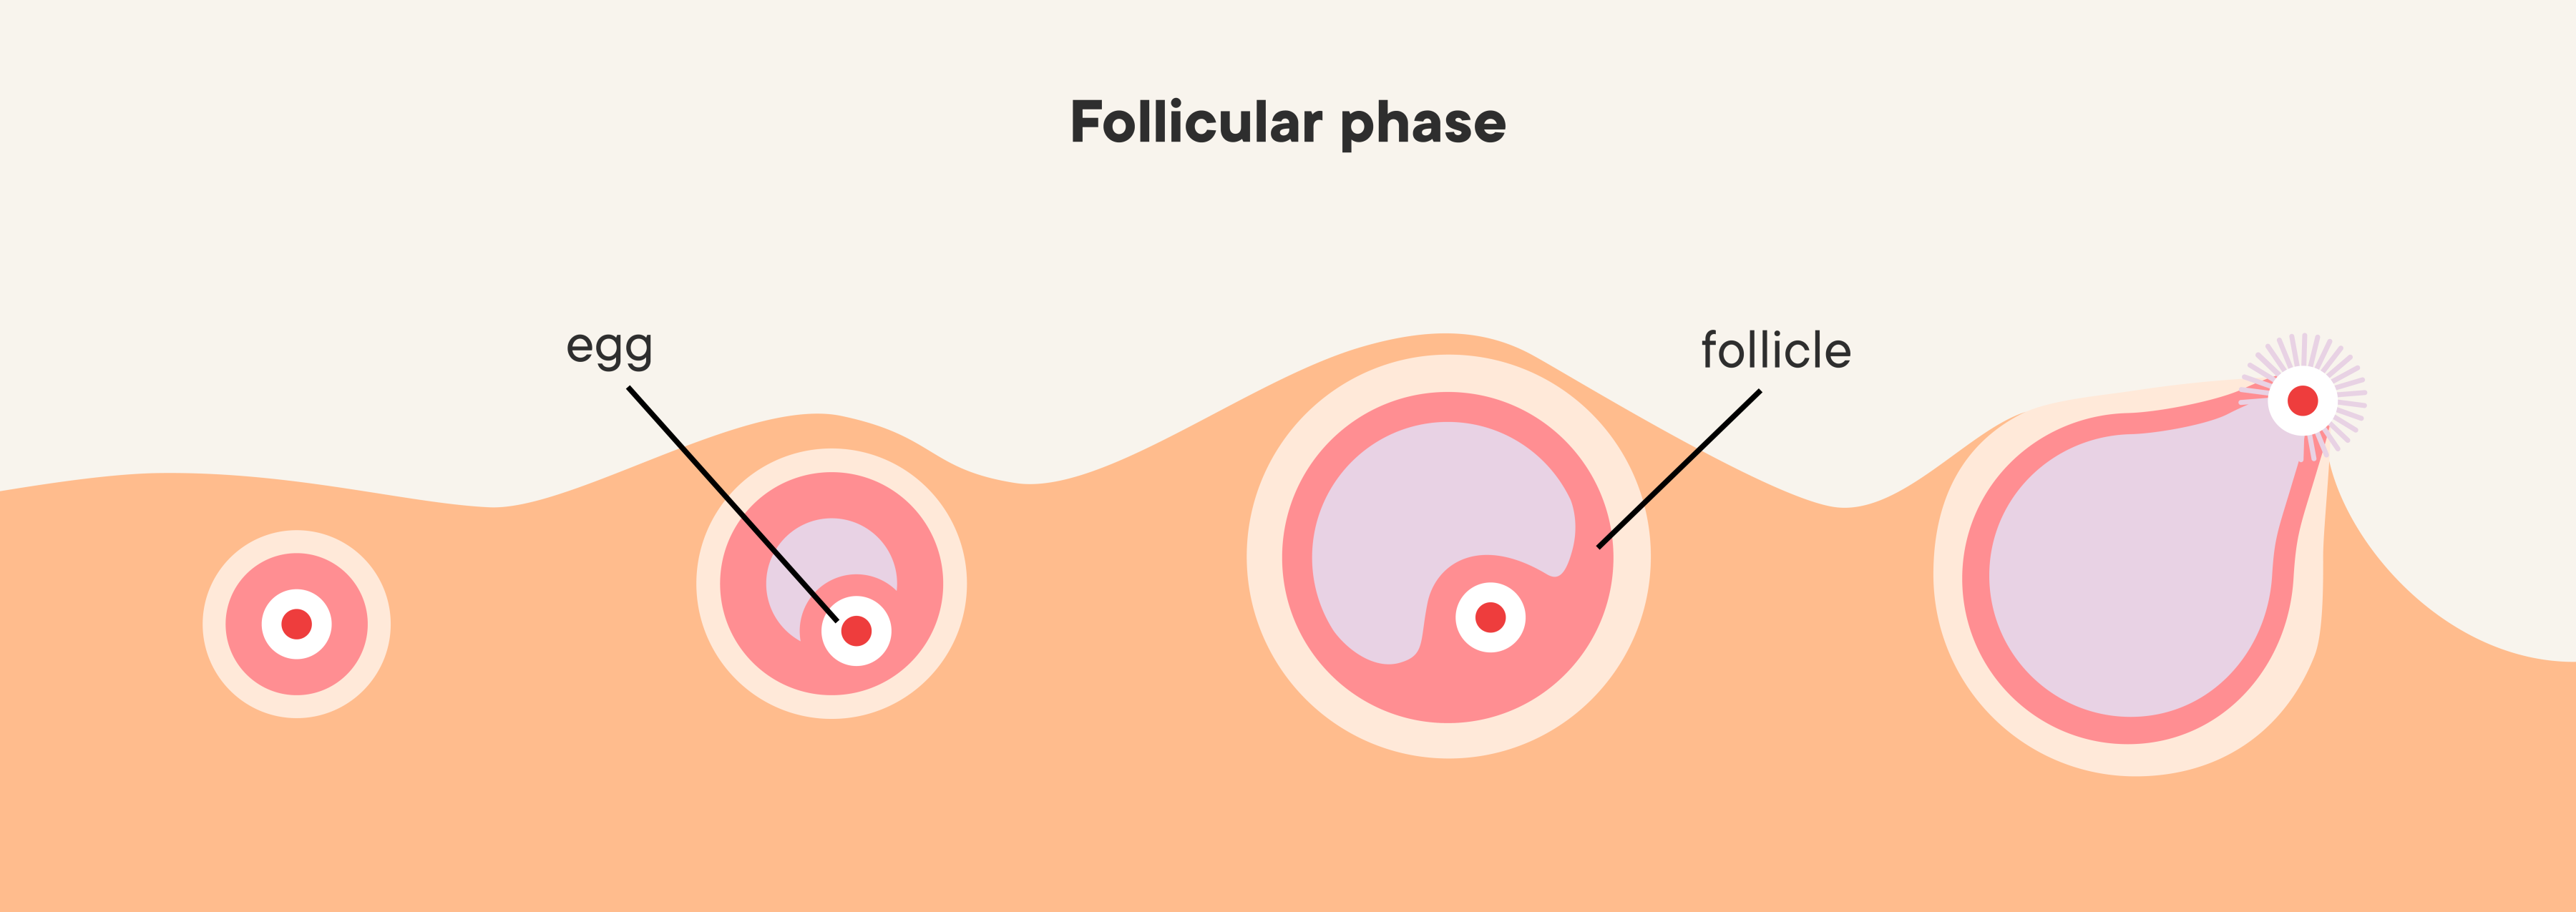 Illustration of the progression of the follicular phase in the ovaries